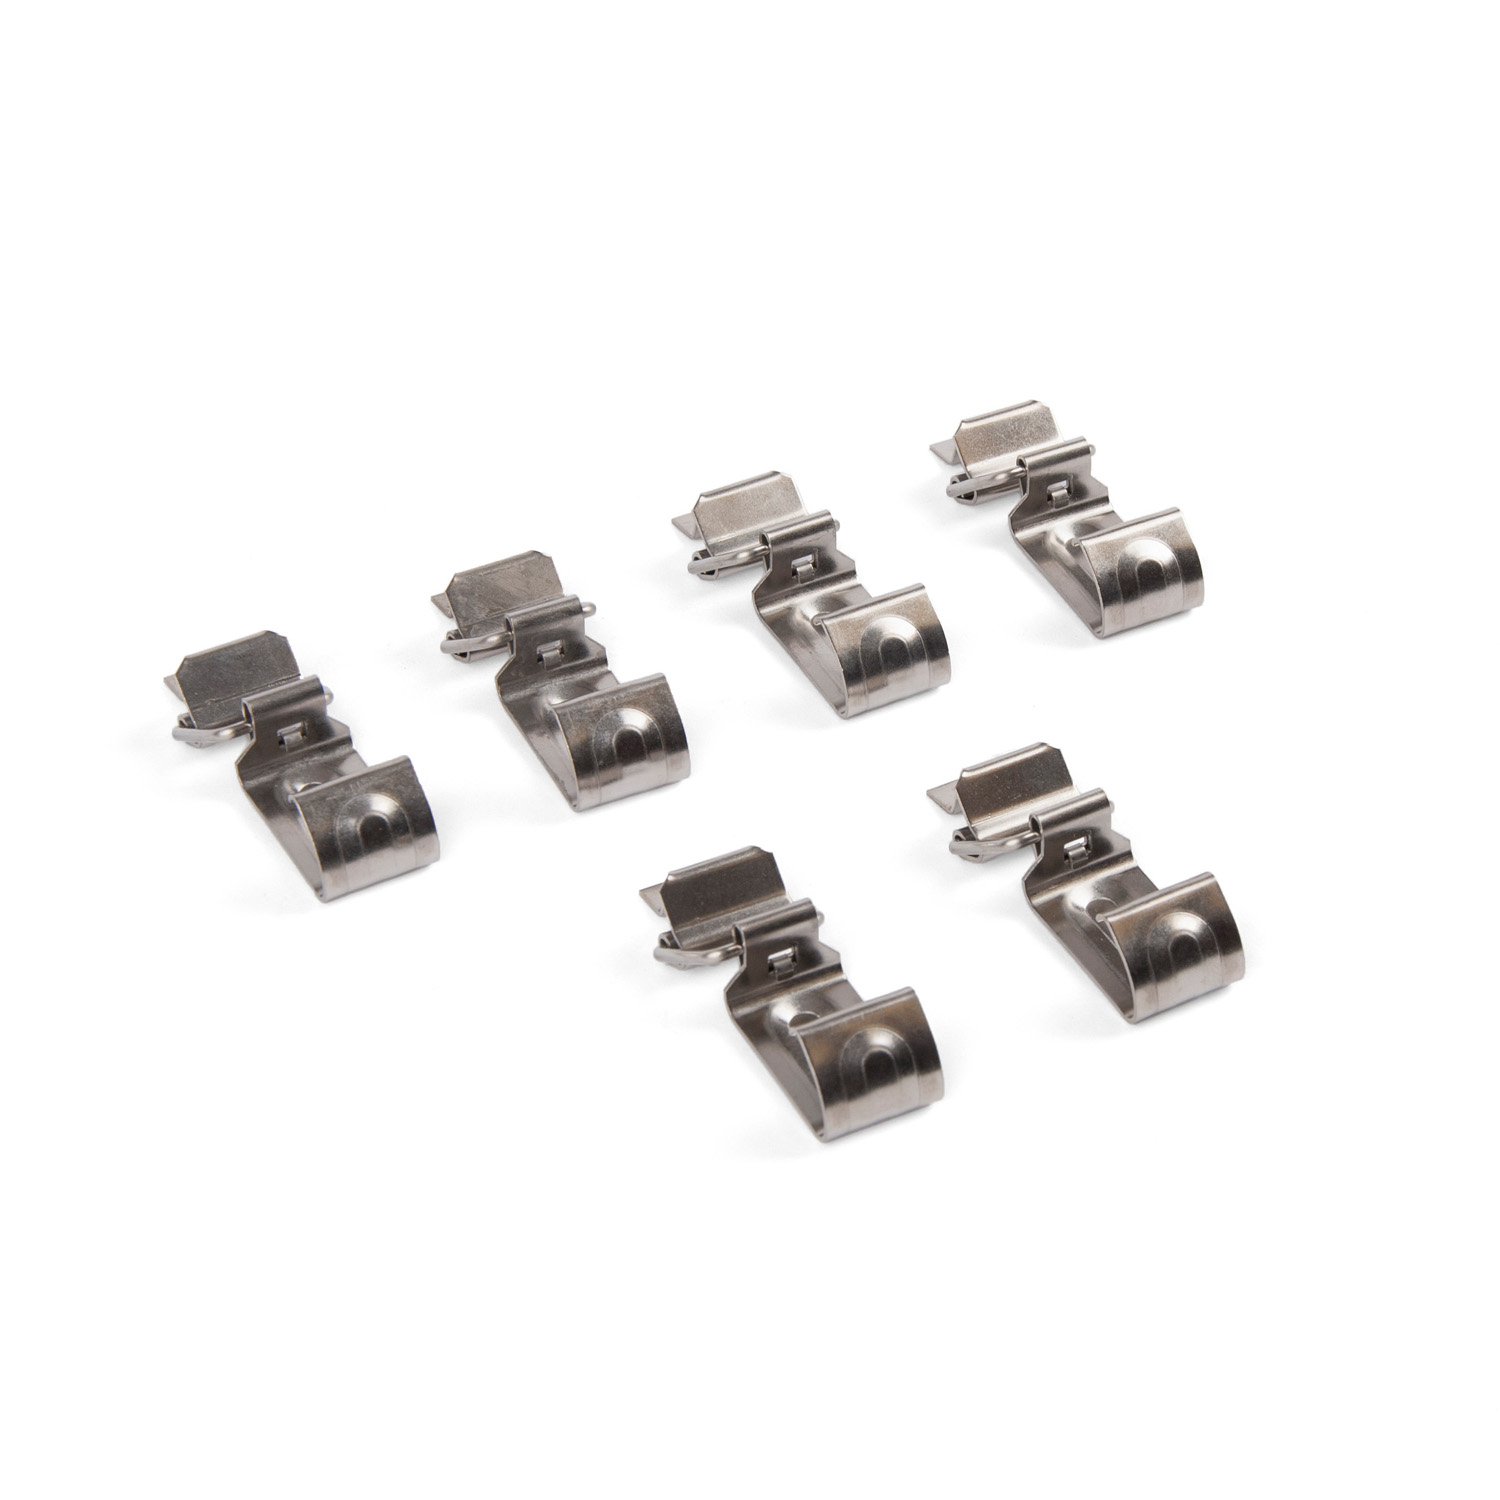 9840045500 Clamp stainless steel, 6pcs, for 1044